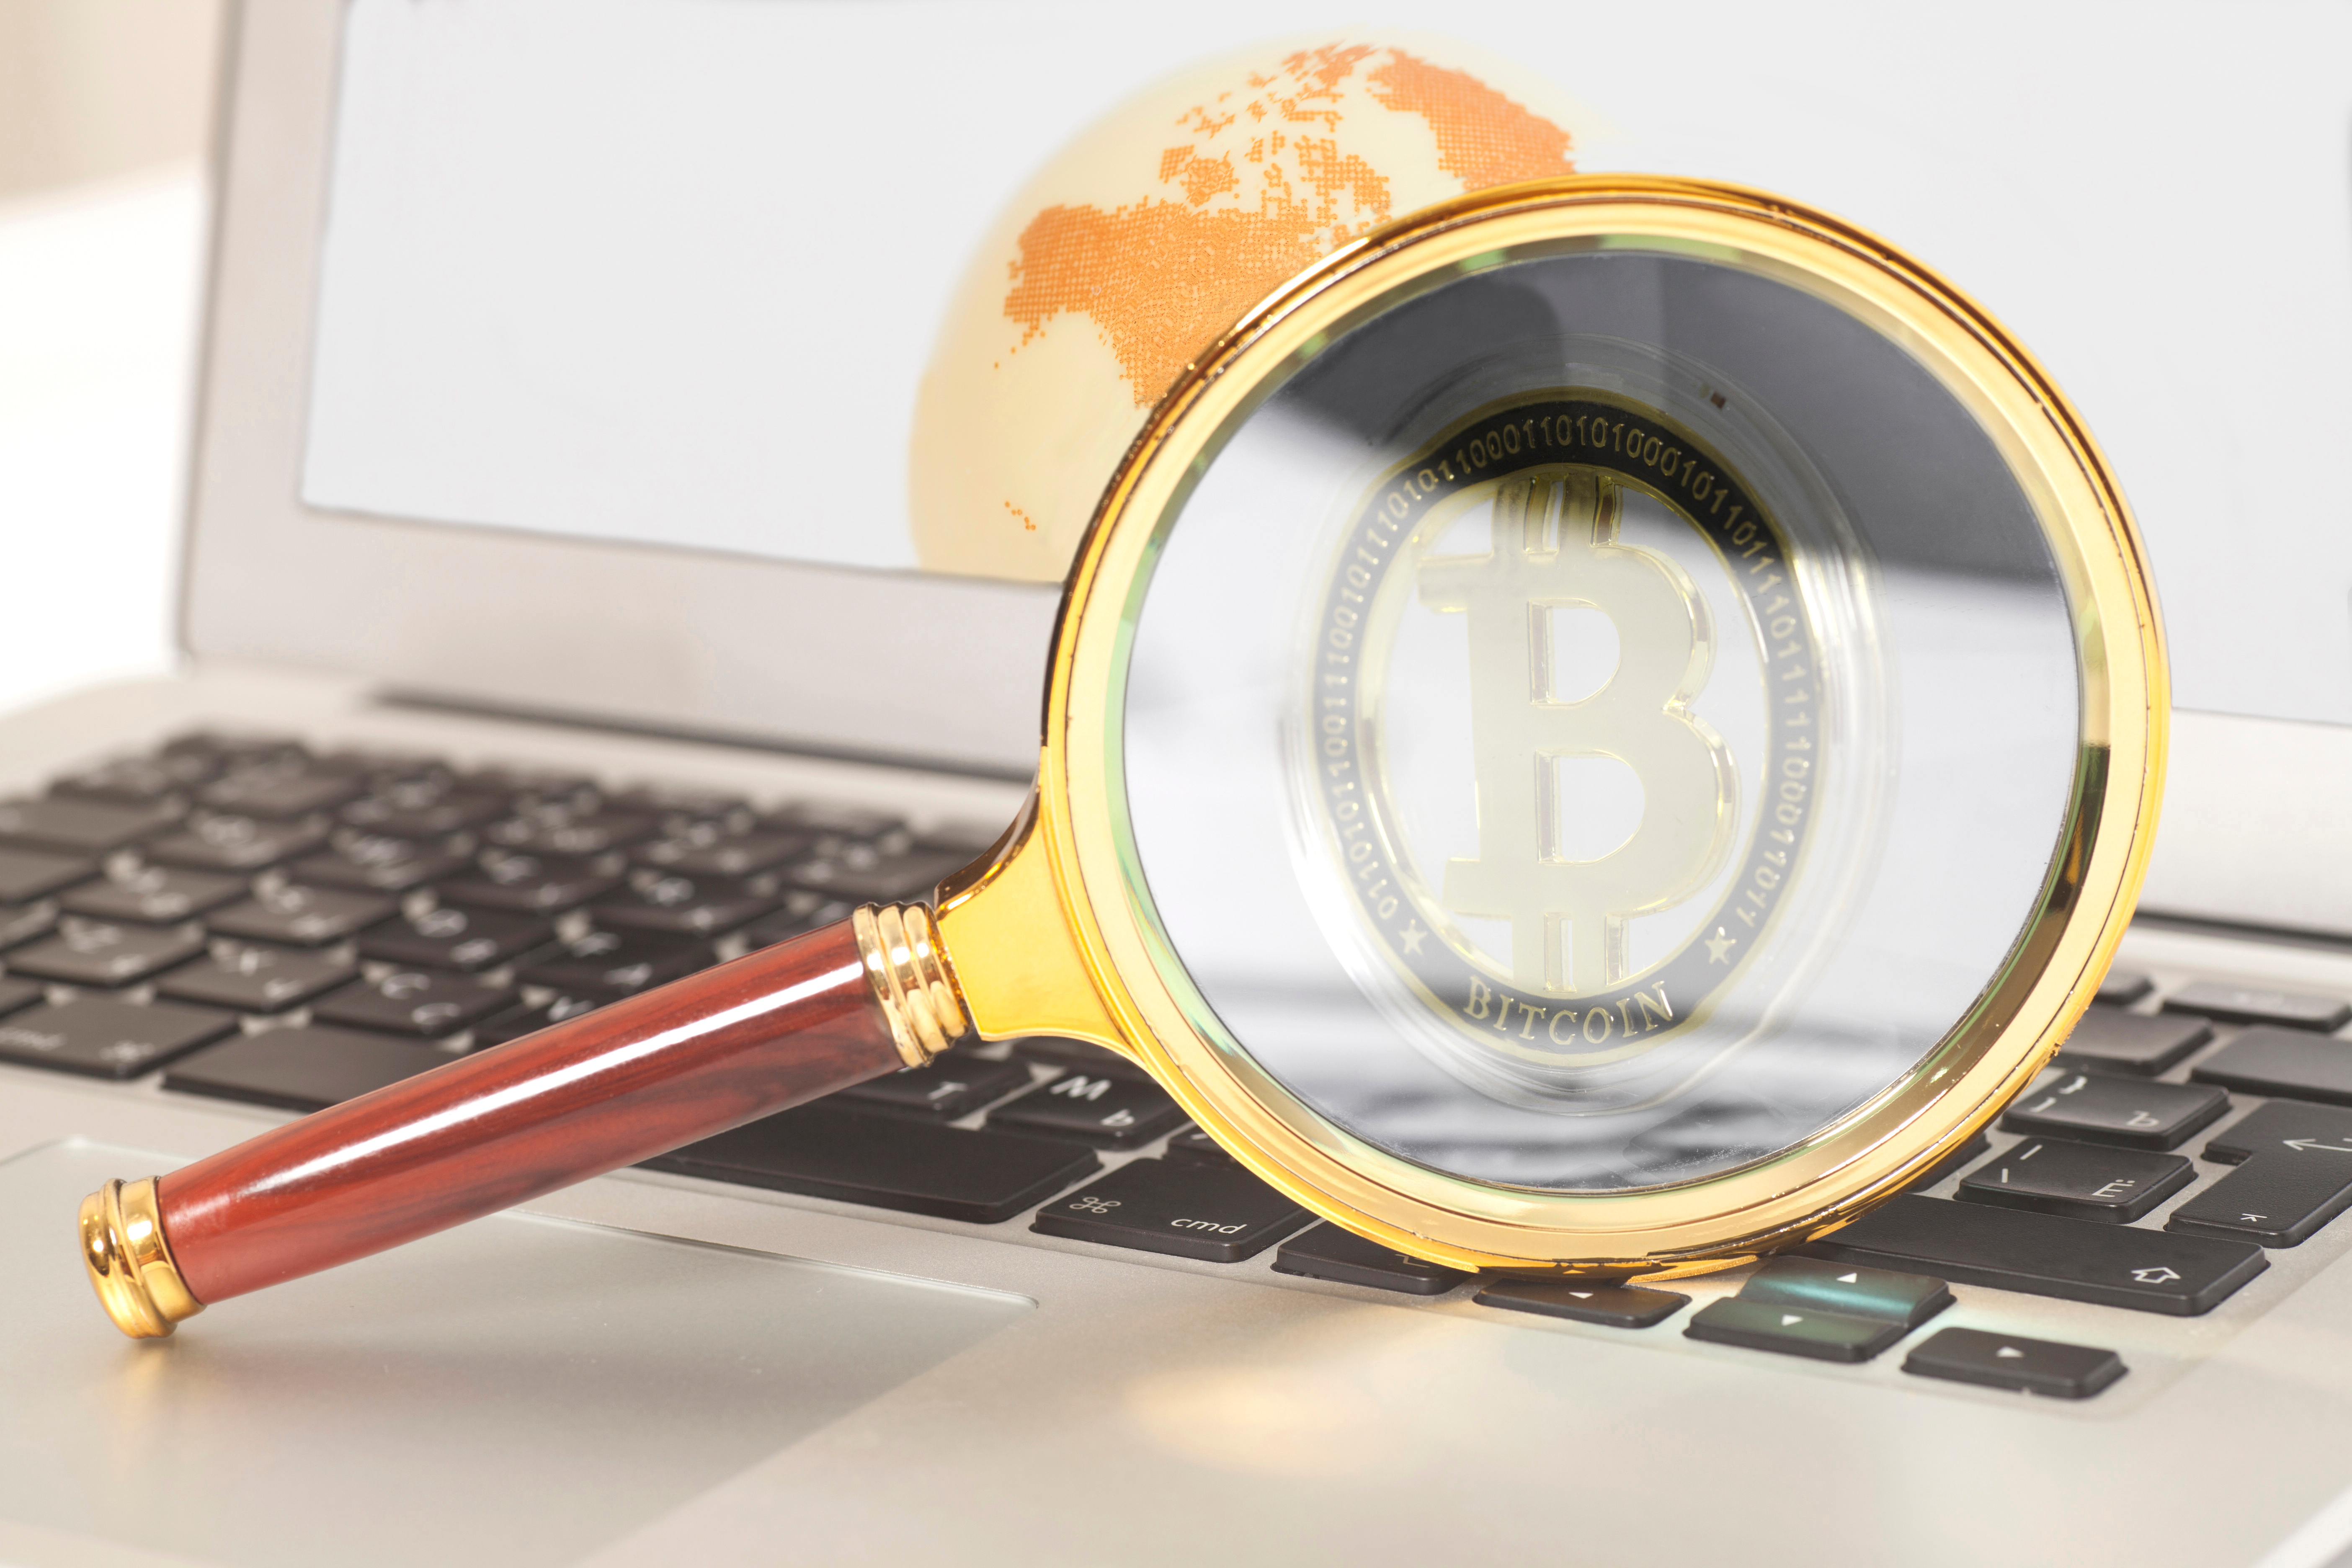 A magnifying glass focuses on a Bitcoin logo on a laptop PC&amp;amp;amp;amp;rsquo;s screen.